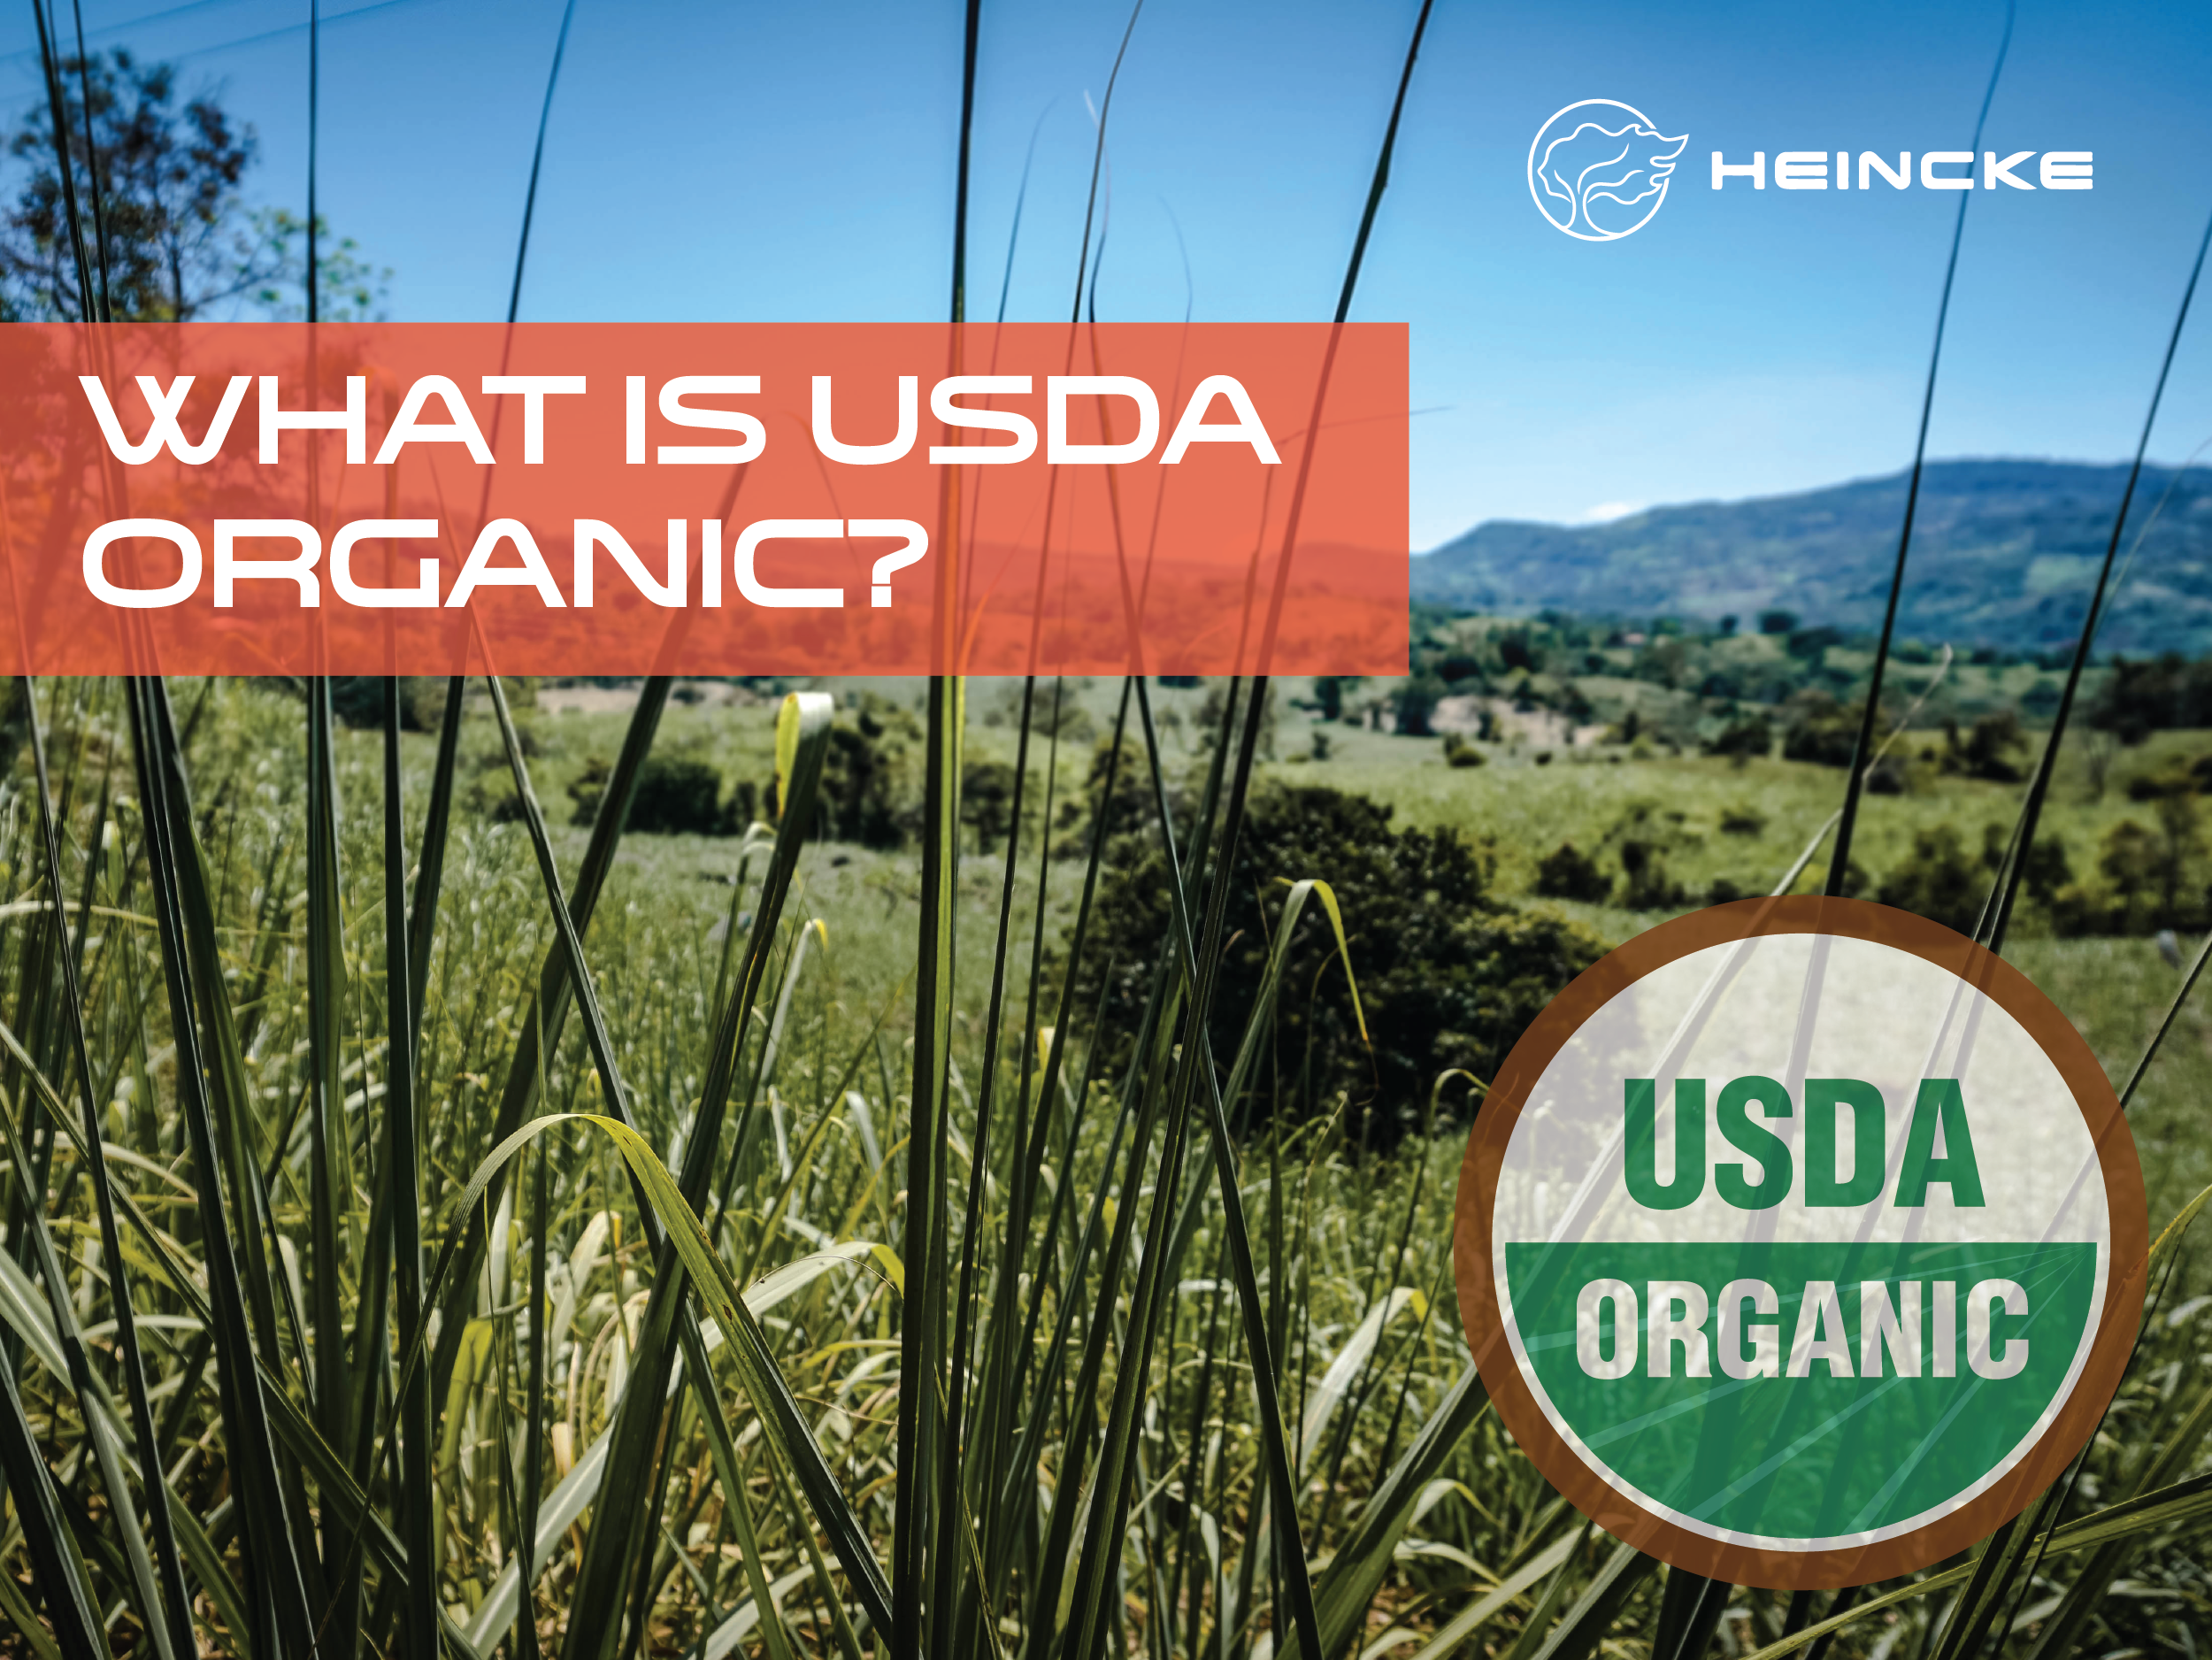 What is USDA Organic?